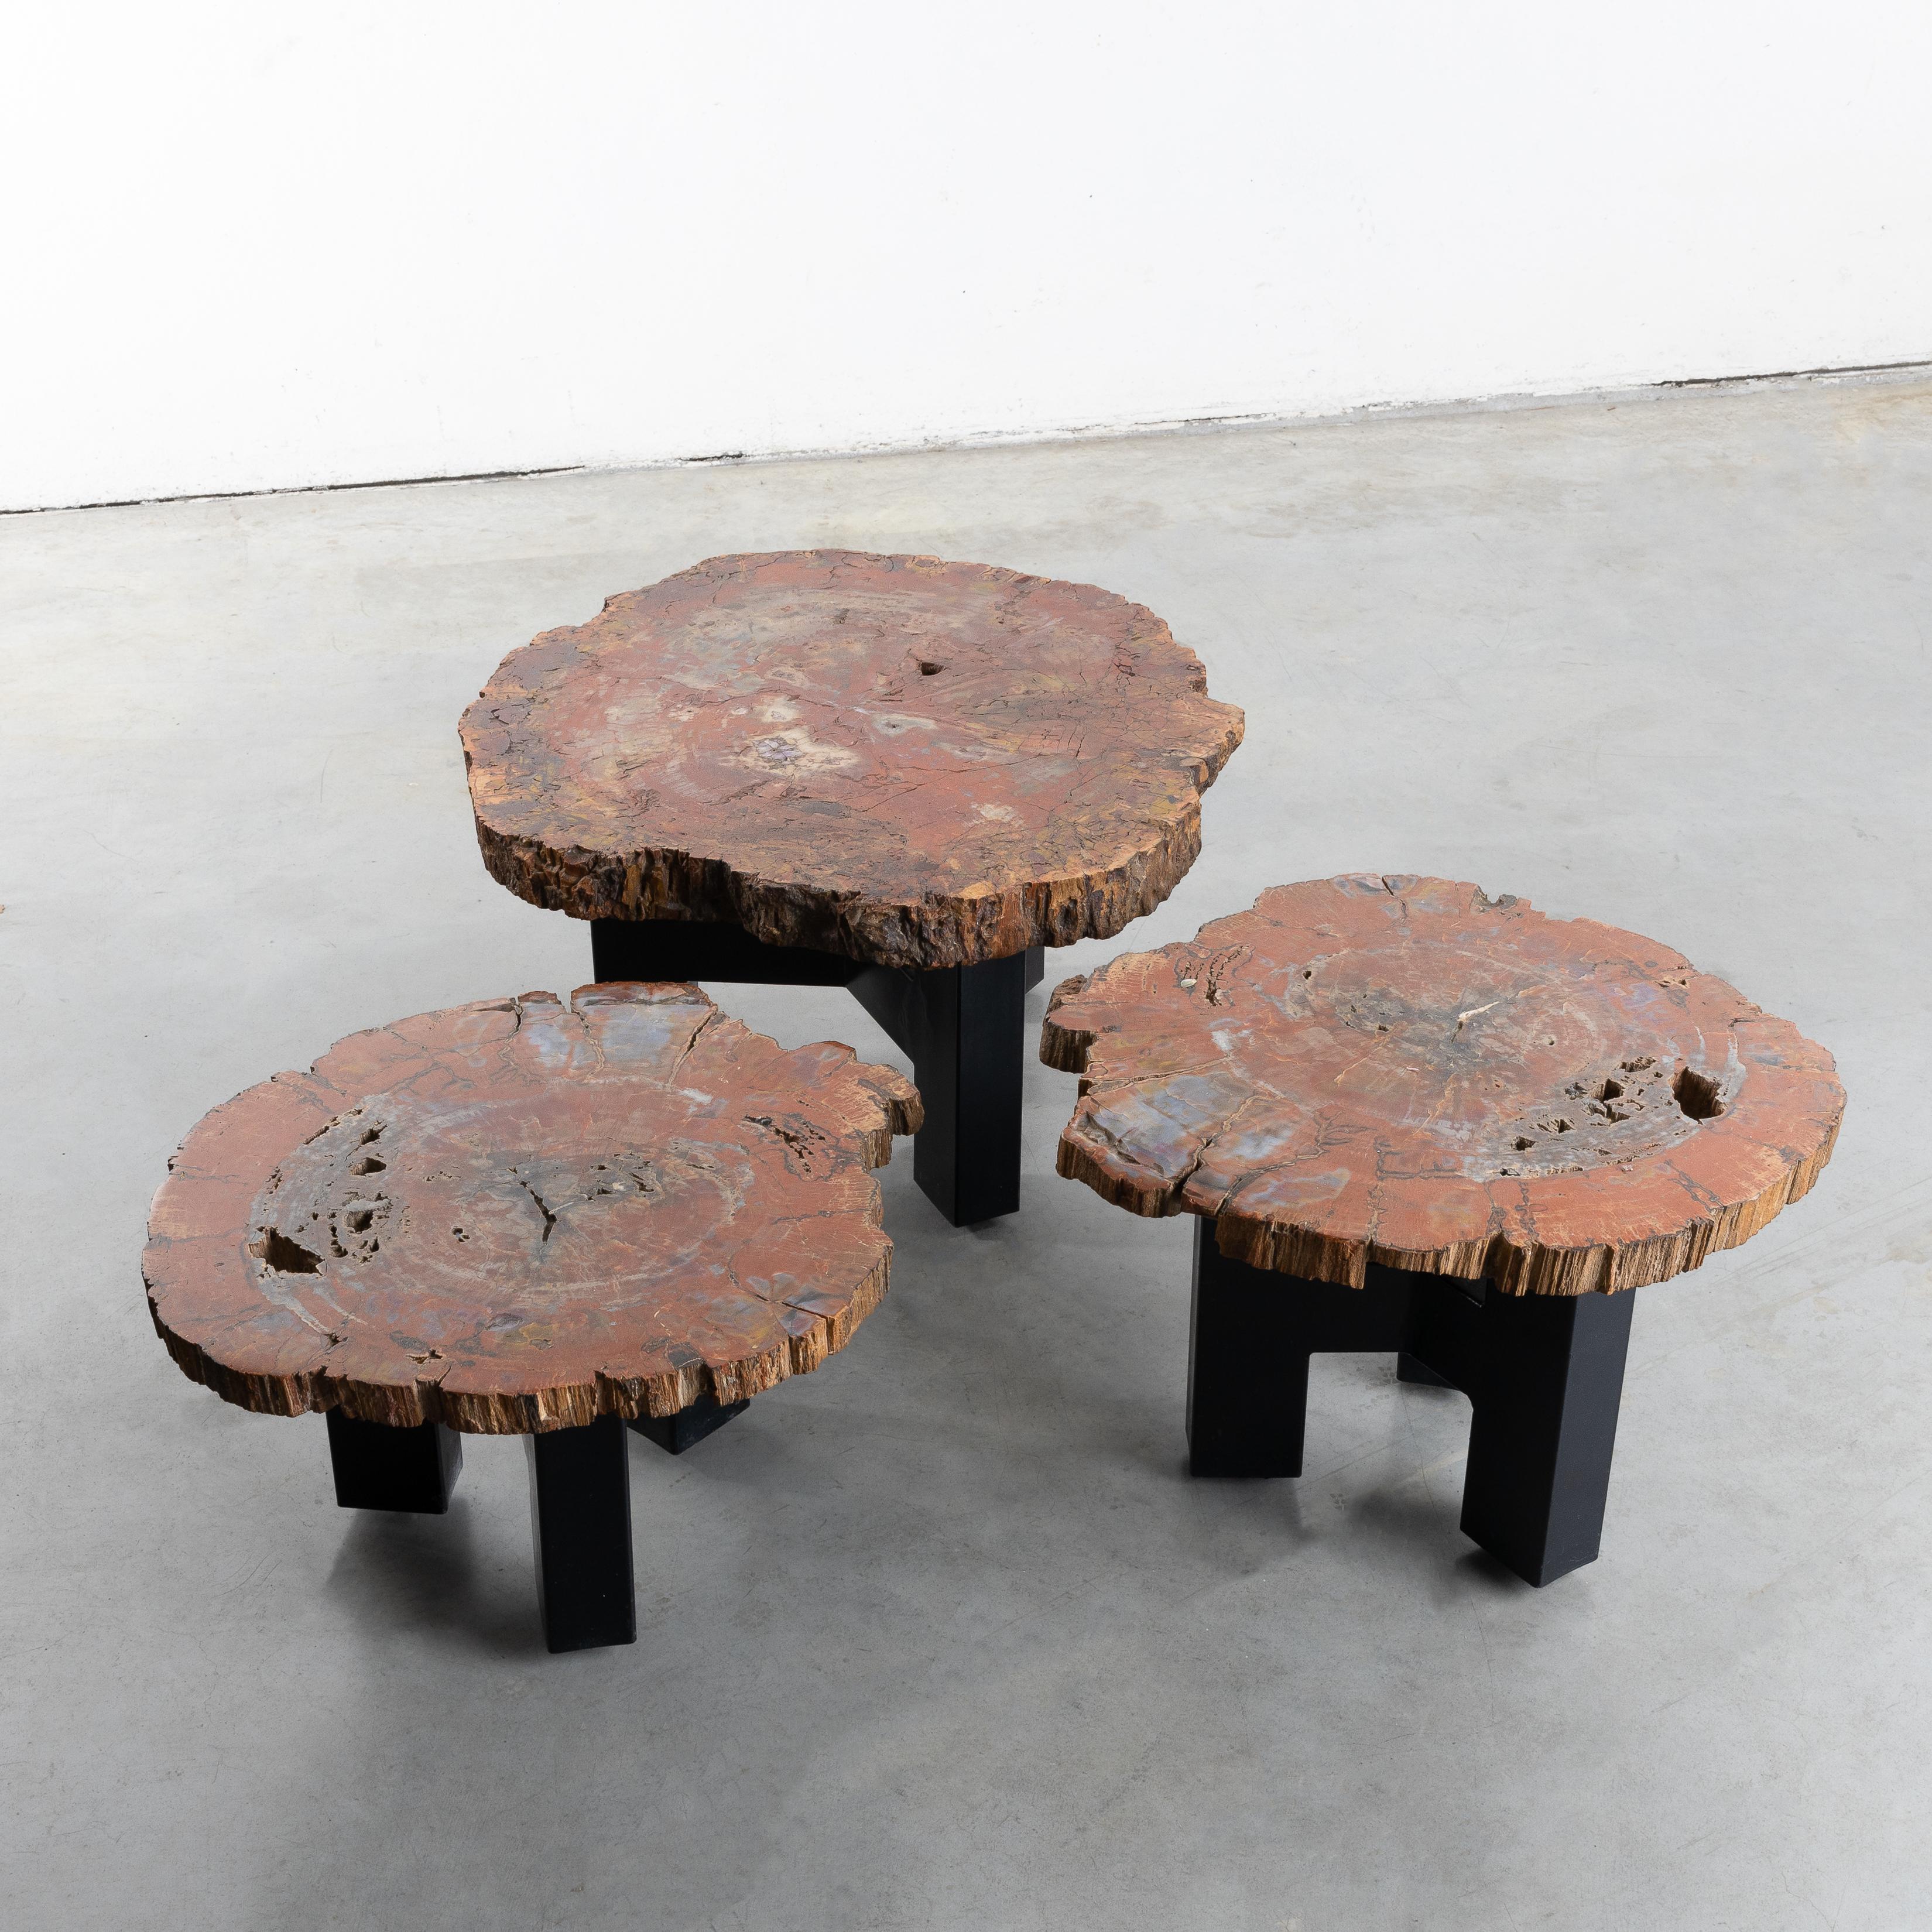 Set of three tables in fossilized wood. The wood chosen here by the artist is Sequoia from Arizona.
Each slice of Sequoia rests on a black painted steel tripod foot of slightly different height.
The feet are equipped with steel balls to facilitate